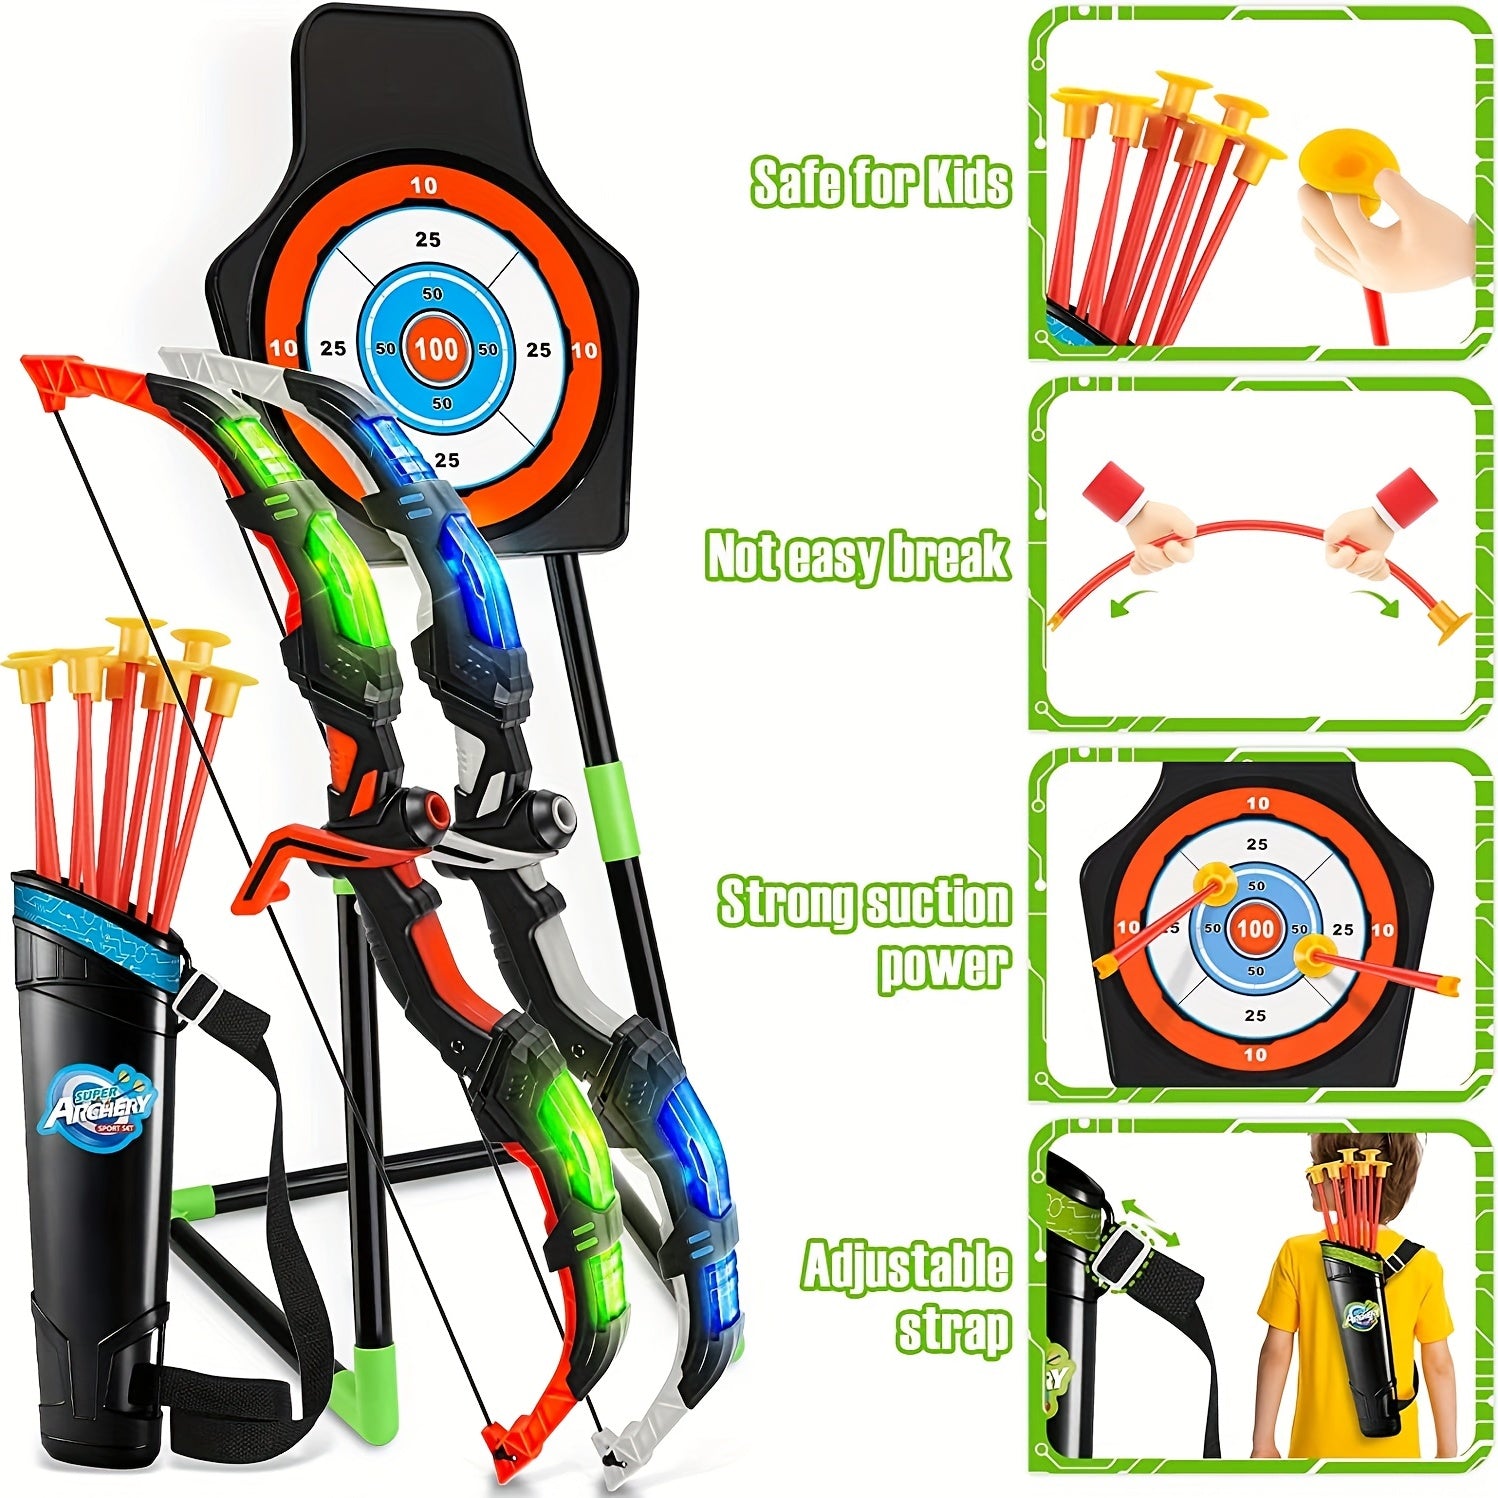 Kids Bow And Arrow Toy Set For Kids 4-6-8-12 Years Old, Archery Toy Set With LED Light - Includes 2 Bows, 20 Suction Cup Arrows, 2 Arrows And 1 Vertical Target - Cykapu